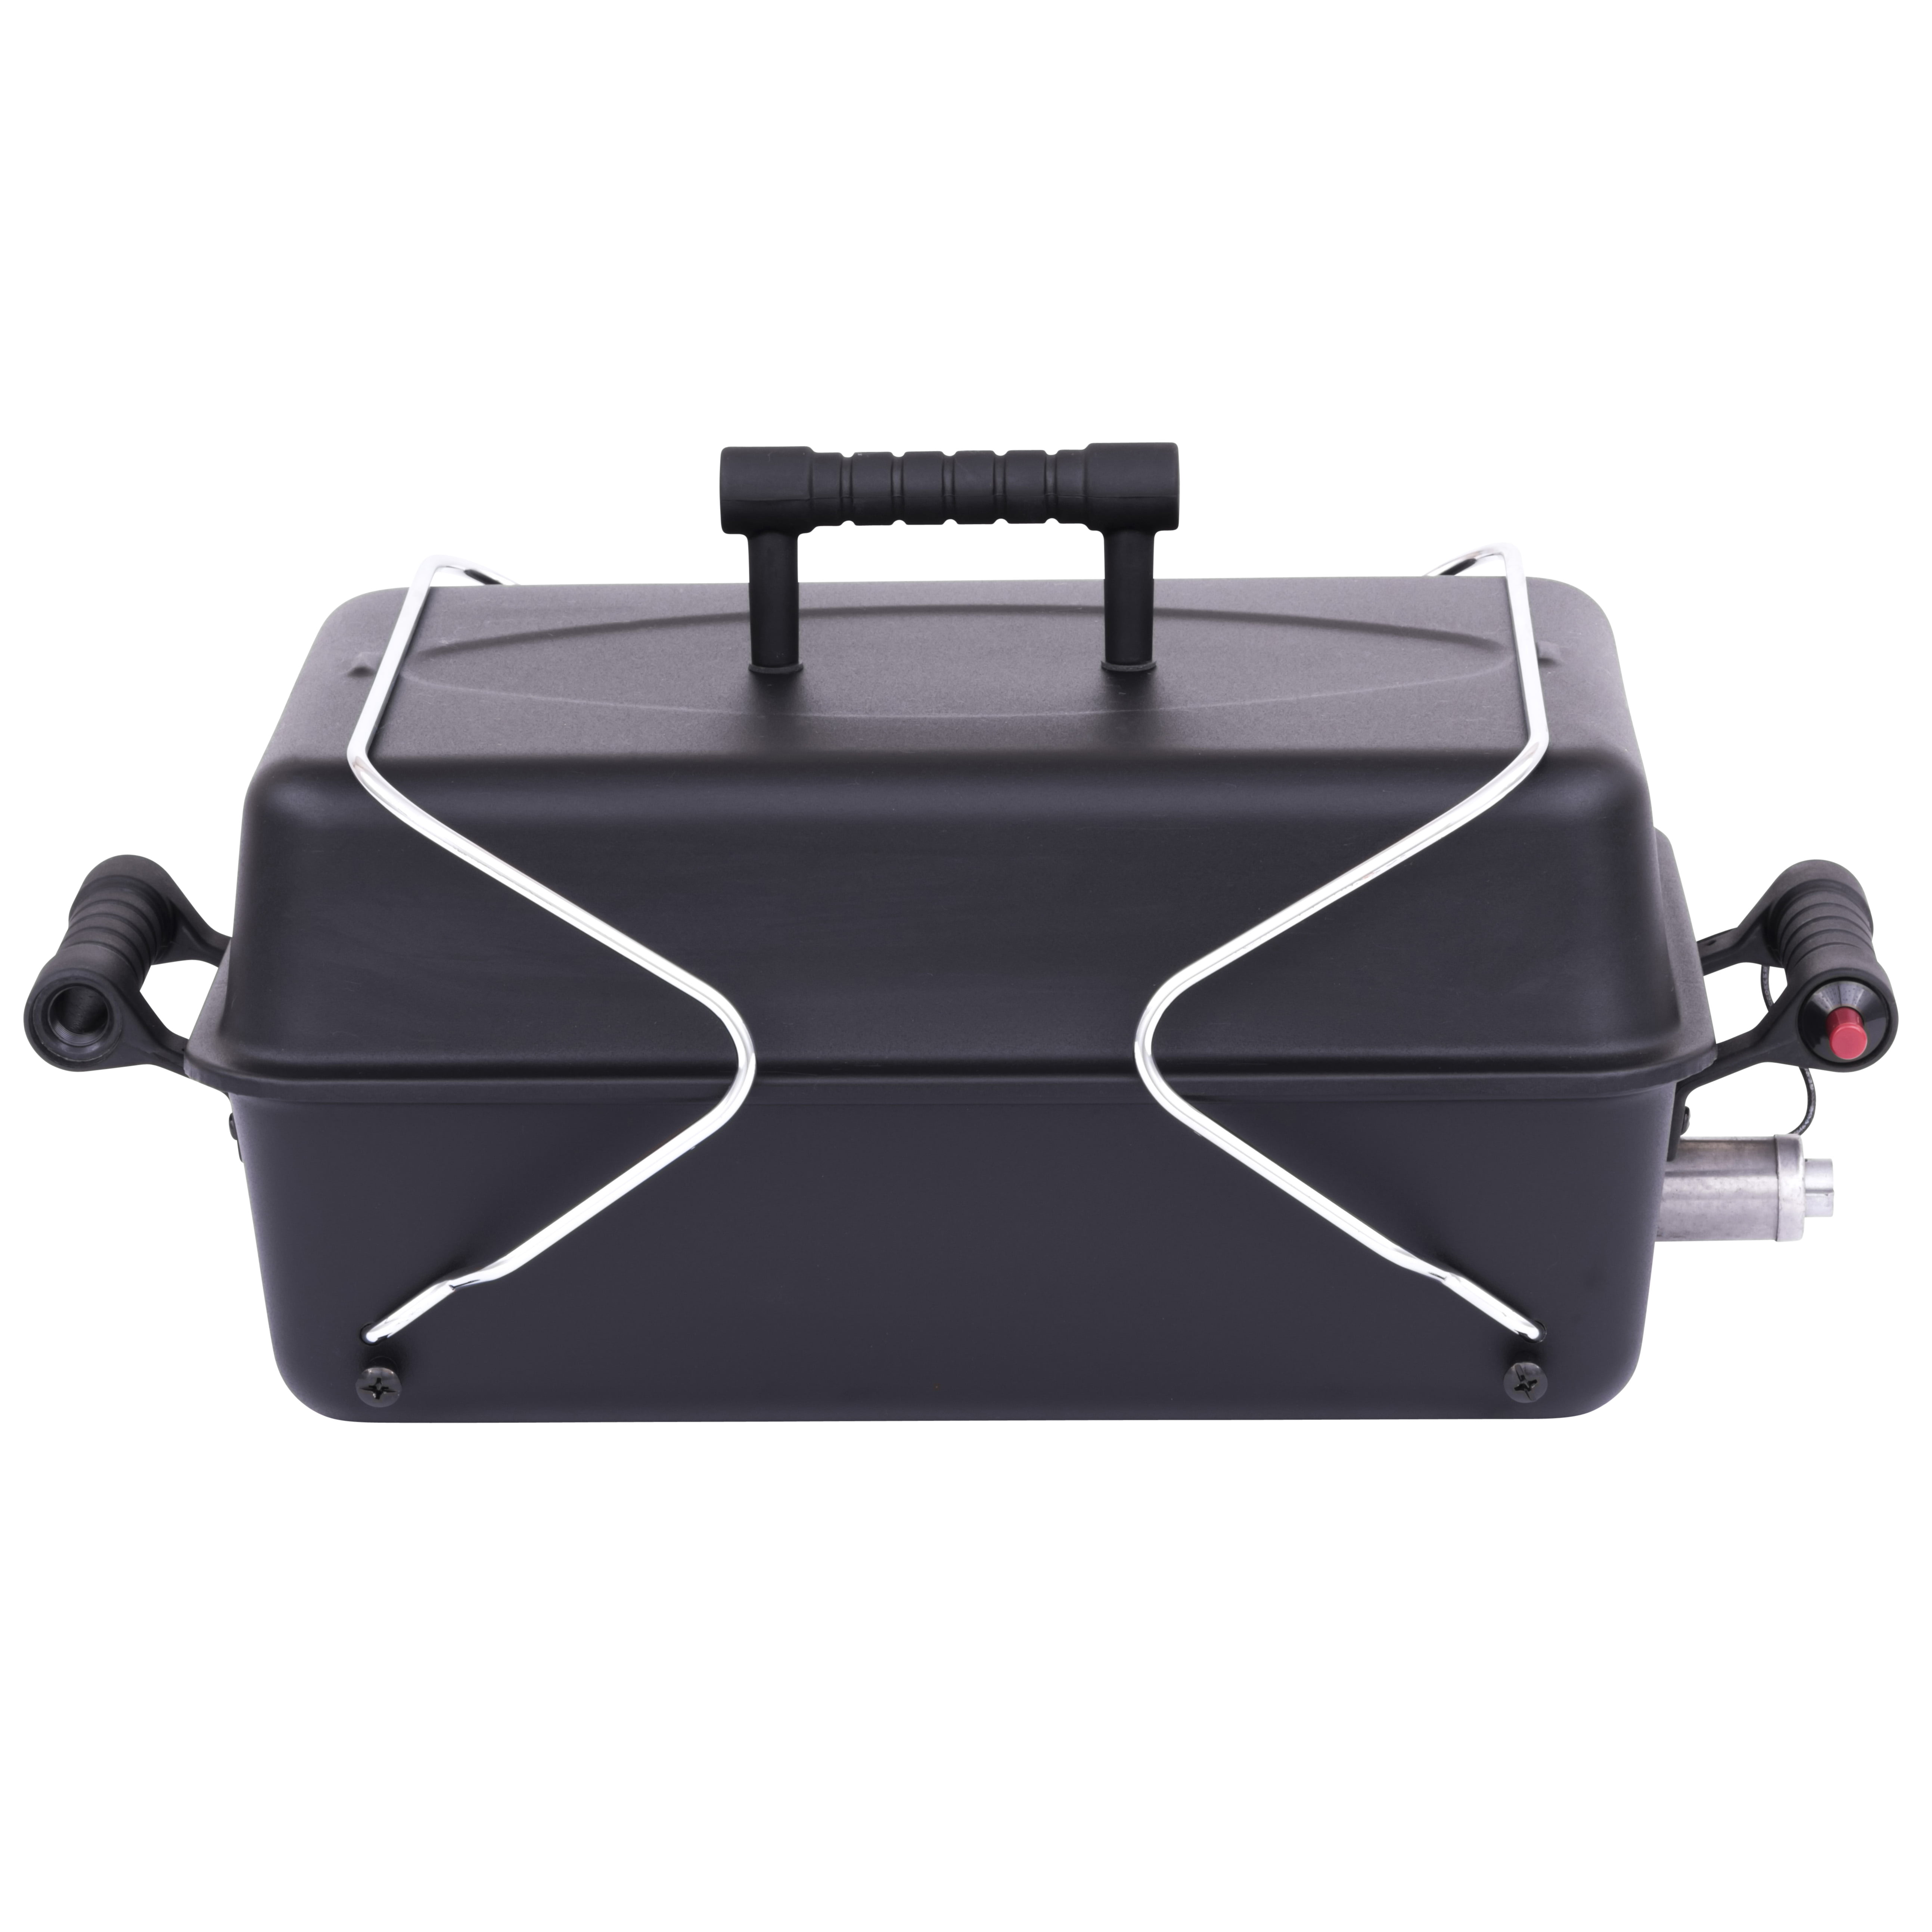 Char-Broil Deluxe Portable Gas Grill 190 (Liquid Propane) $18 + Free S&H w/ Walmart+ or $35+